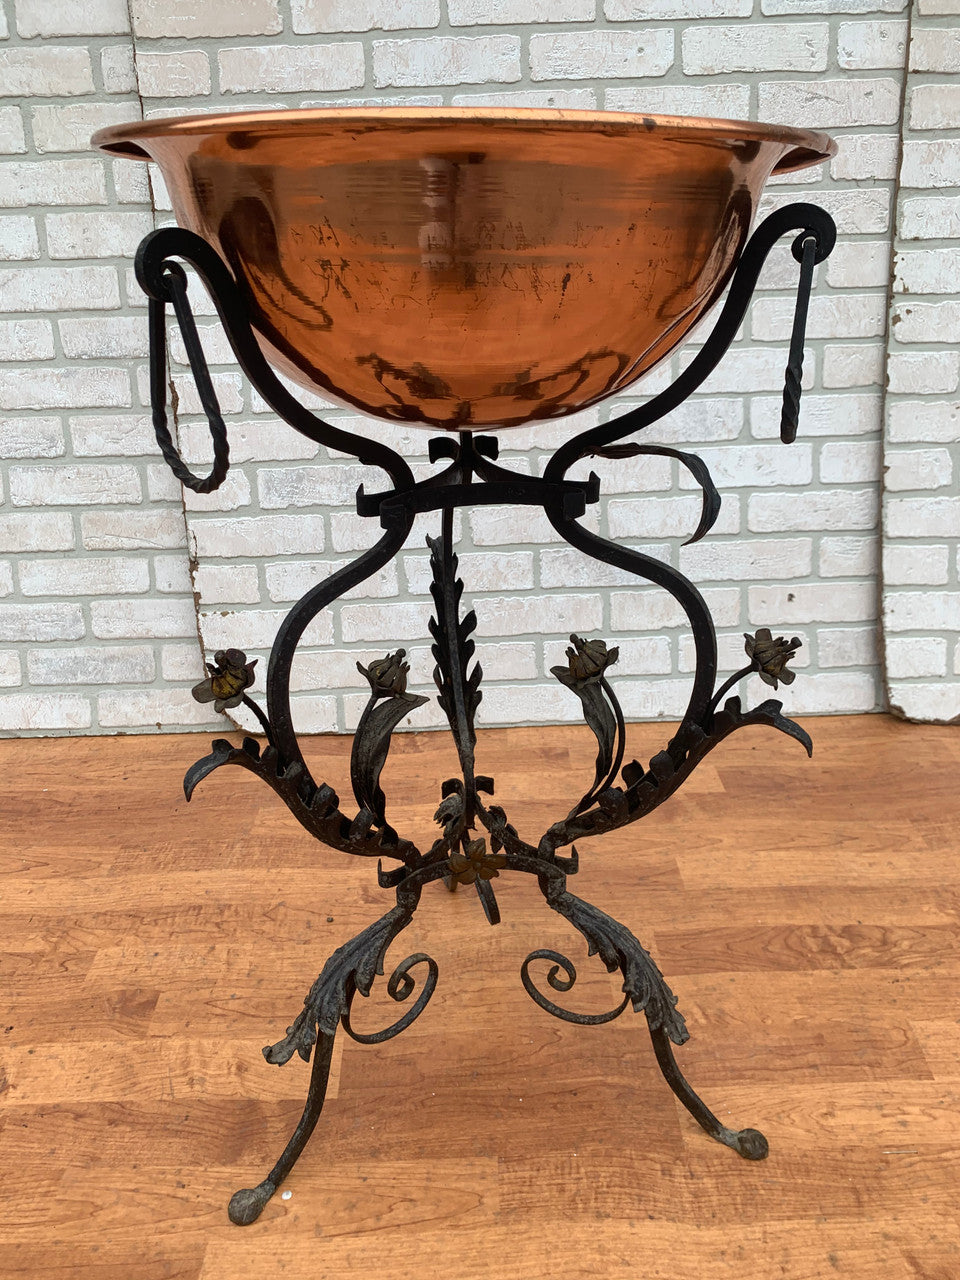 Enhance Your Garden with the Antique Floral Accent Wrought Iron and Copper Planter - 2 Piece Set